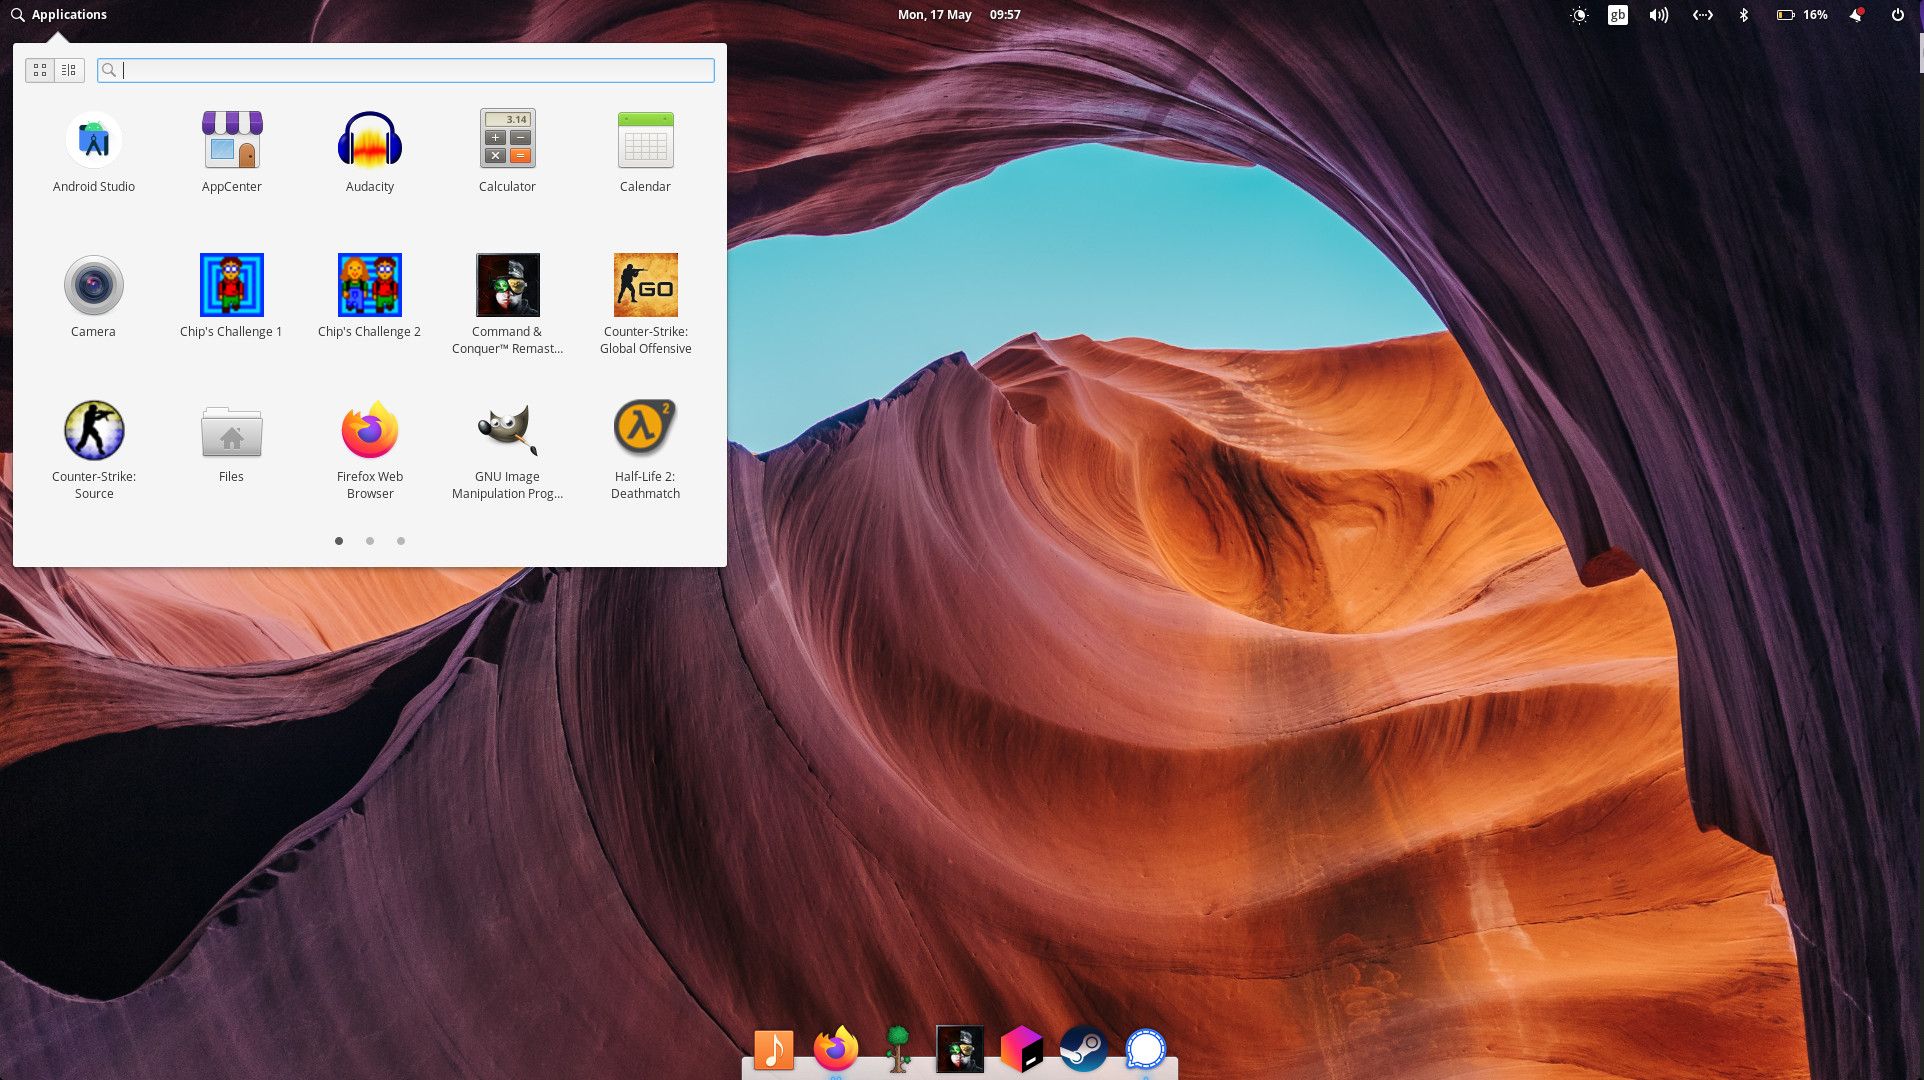 Screenshot of the Pantheon desktop, showing the applications menu open in the top right and a dock at the bottom centre.